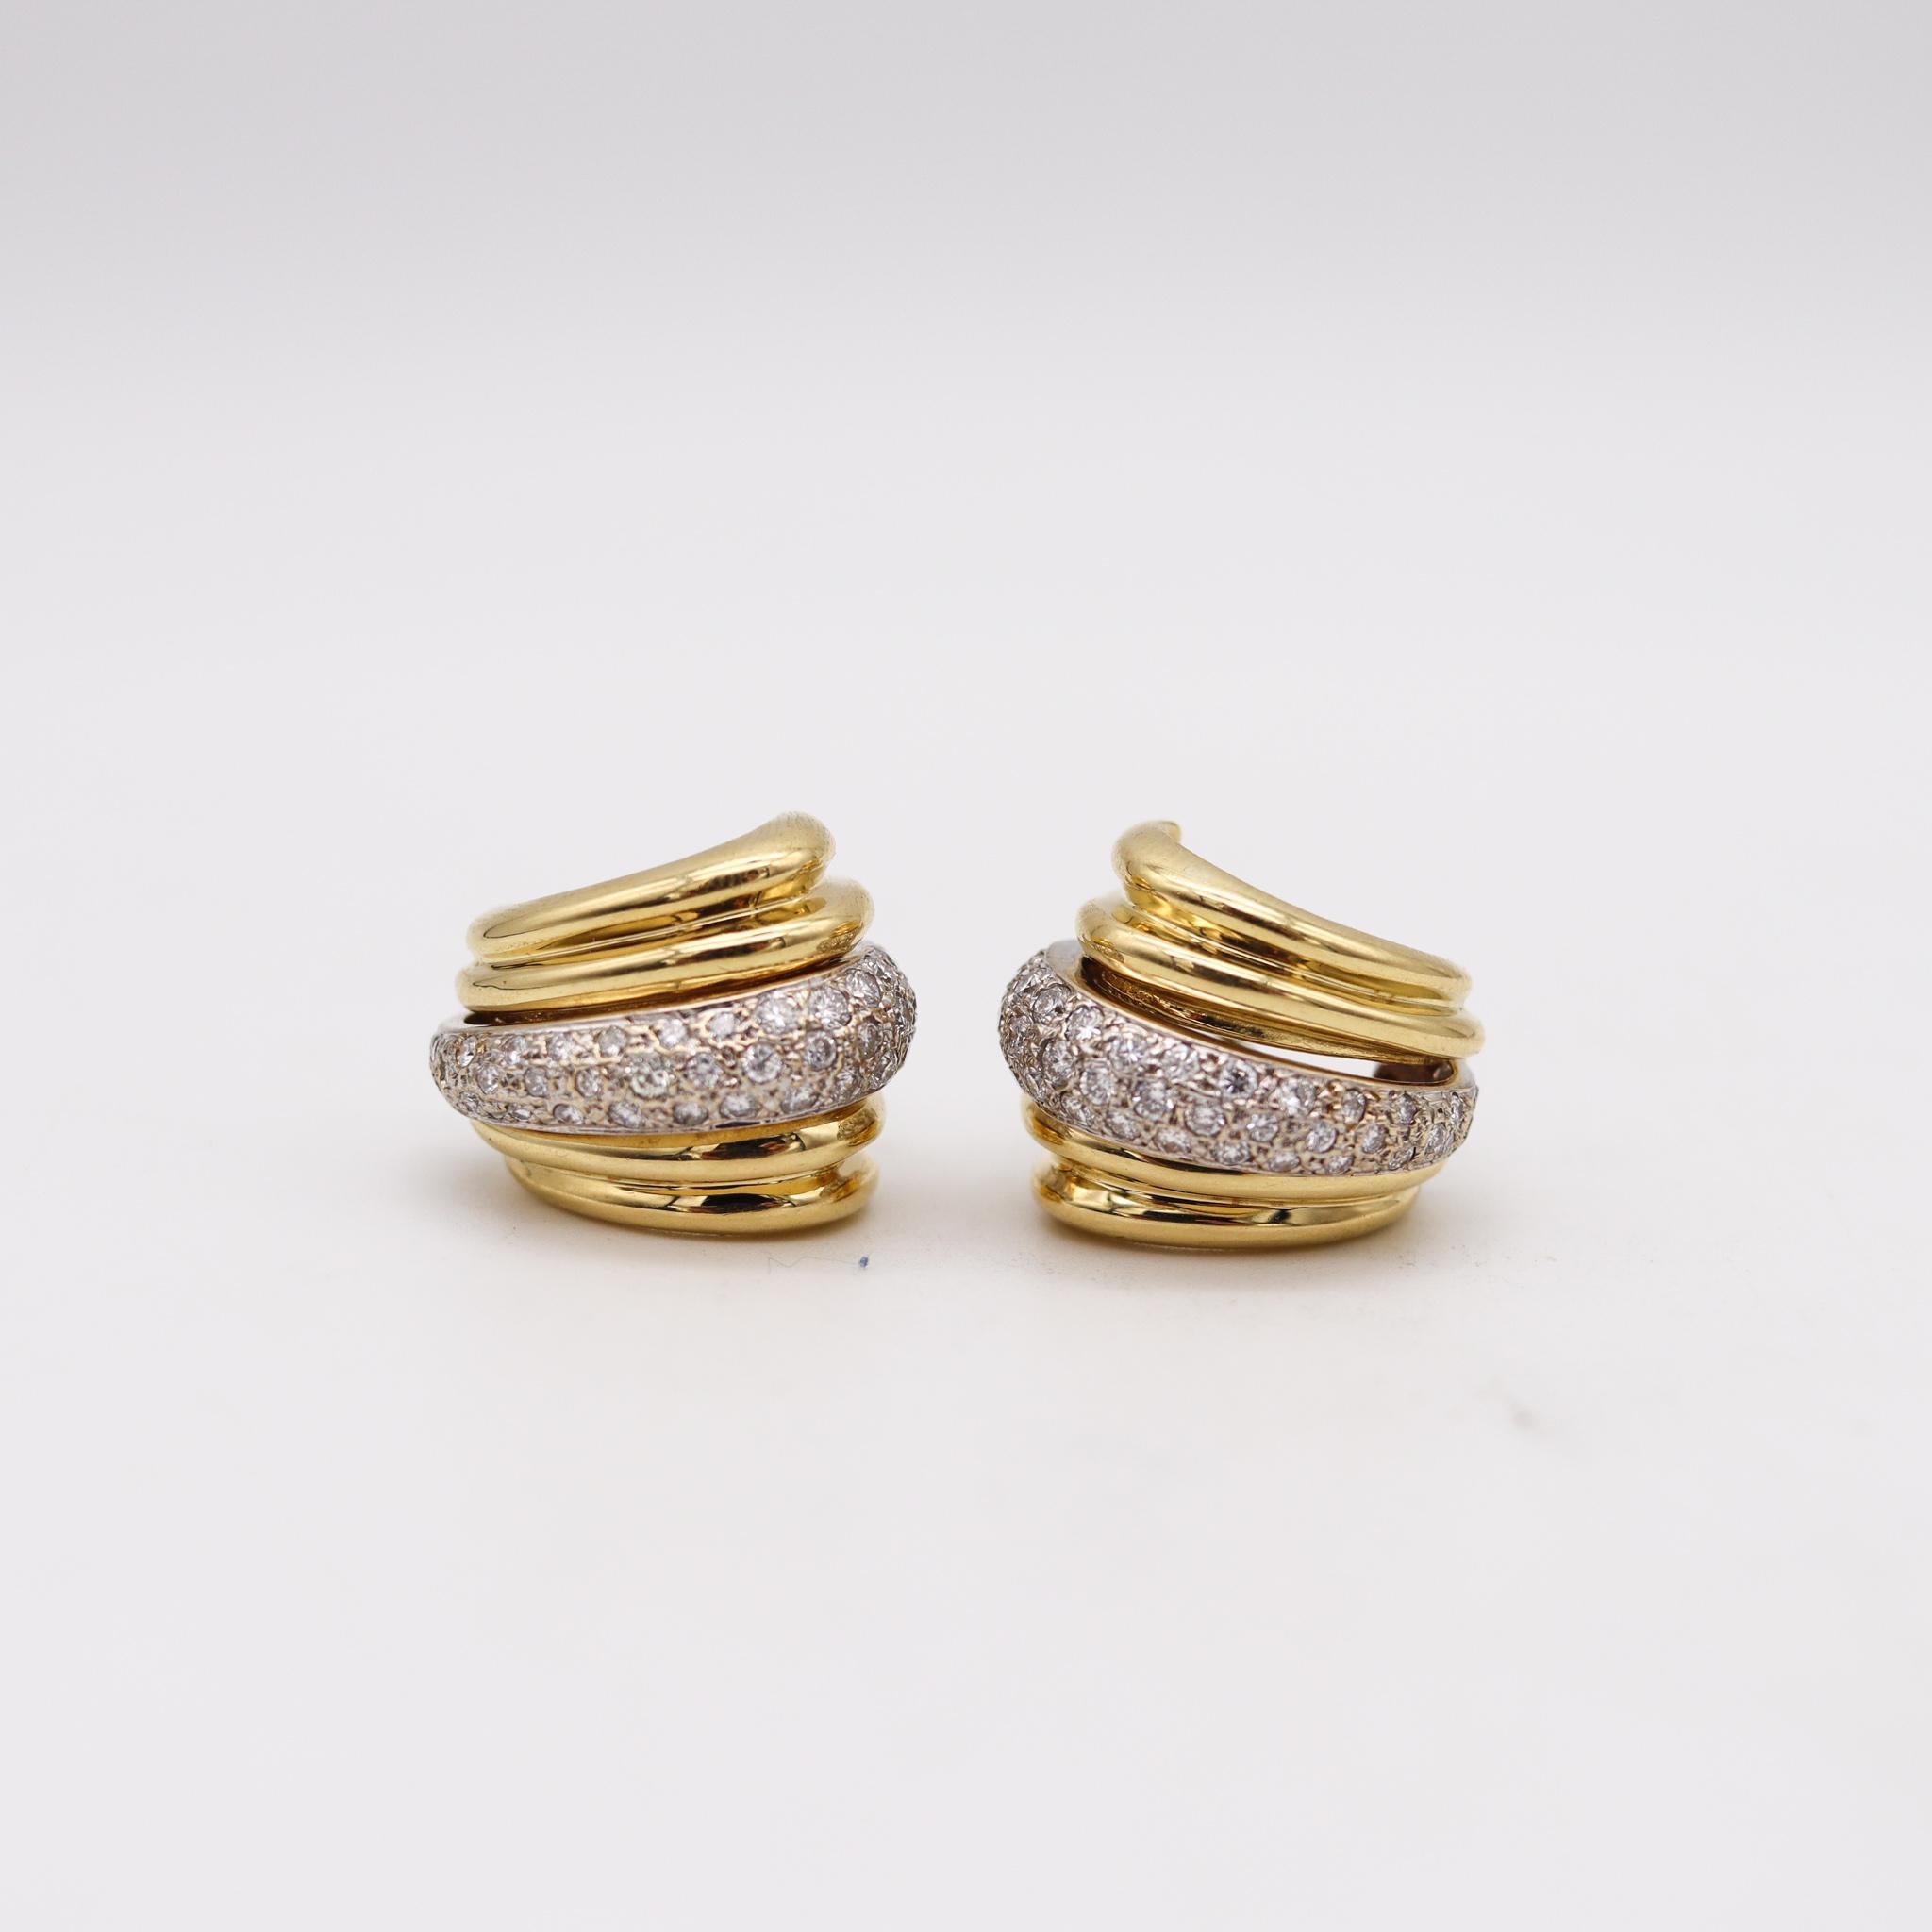 Nice pair of Italian convertible earrings.

Beautiful and elegant pair of convertible earrings, crafted in Italy in solid gold of 18 karats with high polished finish. Fitted with two dismountable parts, French omega backs for fastening clips and